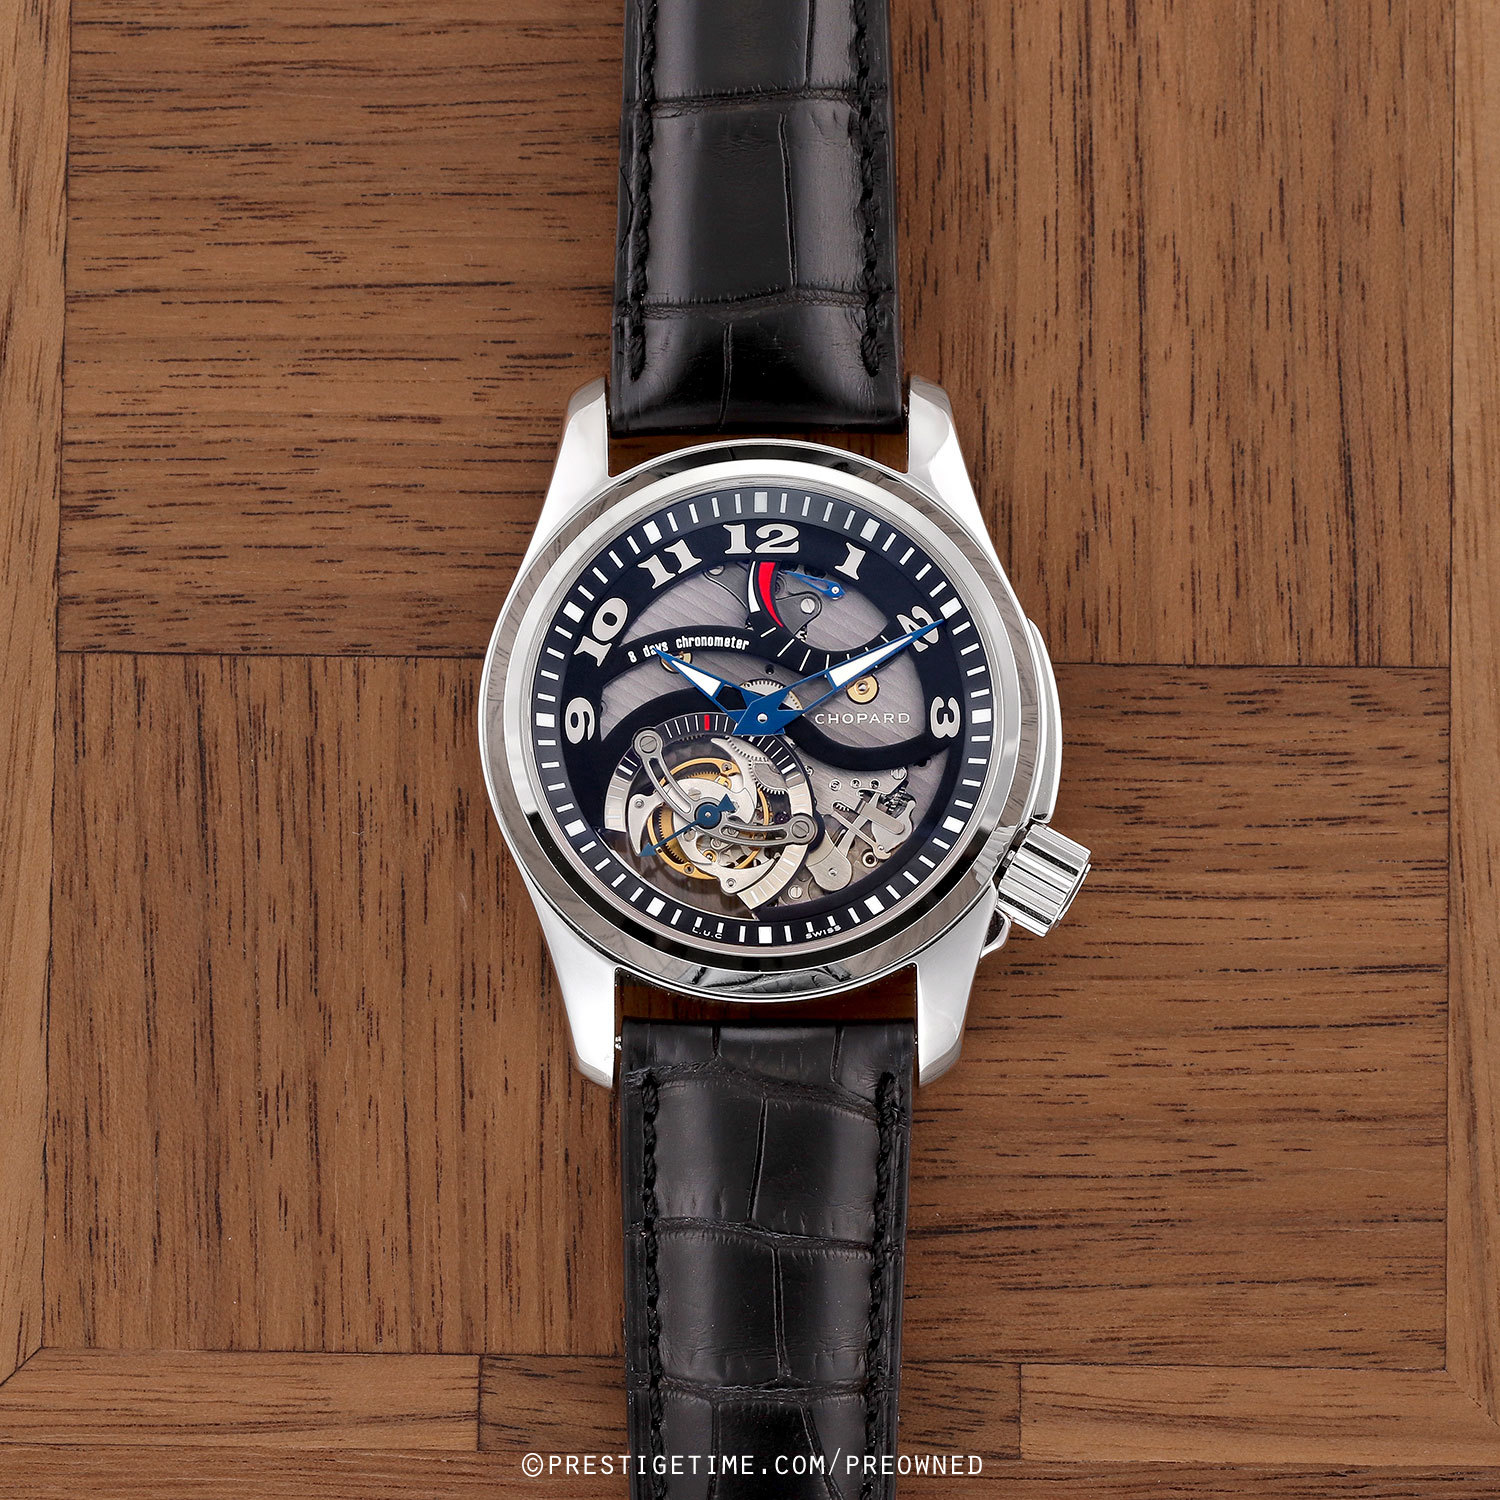 https://www.prestigetime.com/preowned/images/watches/2022/03/102327/Chopard_161917-1001_56115_01.jpg